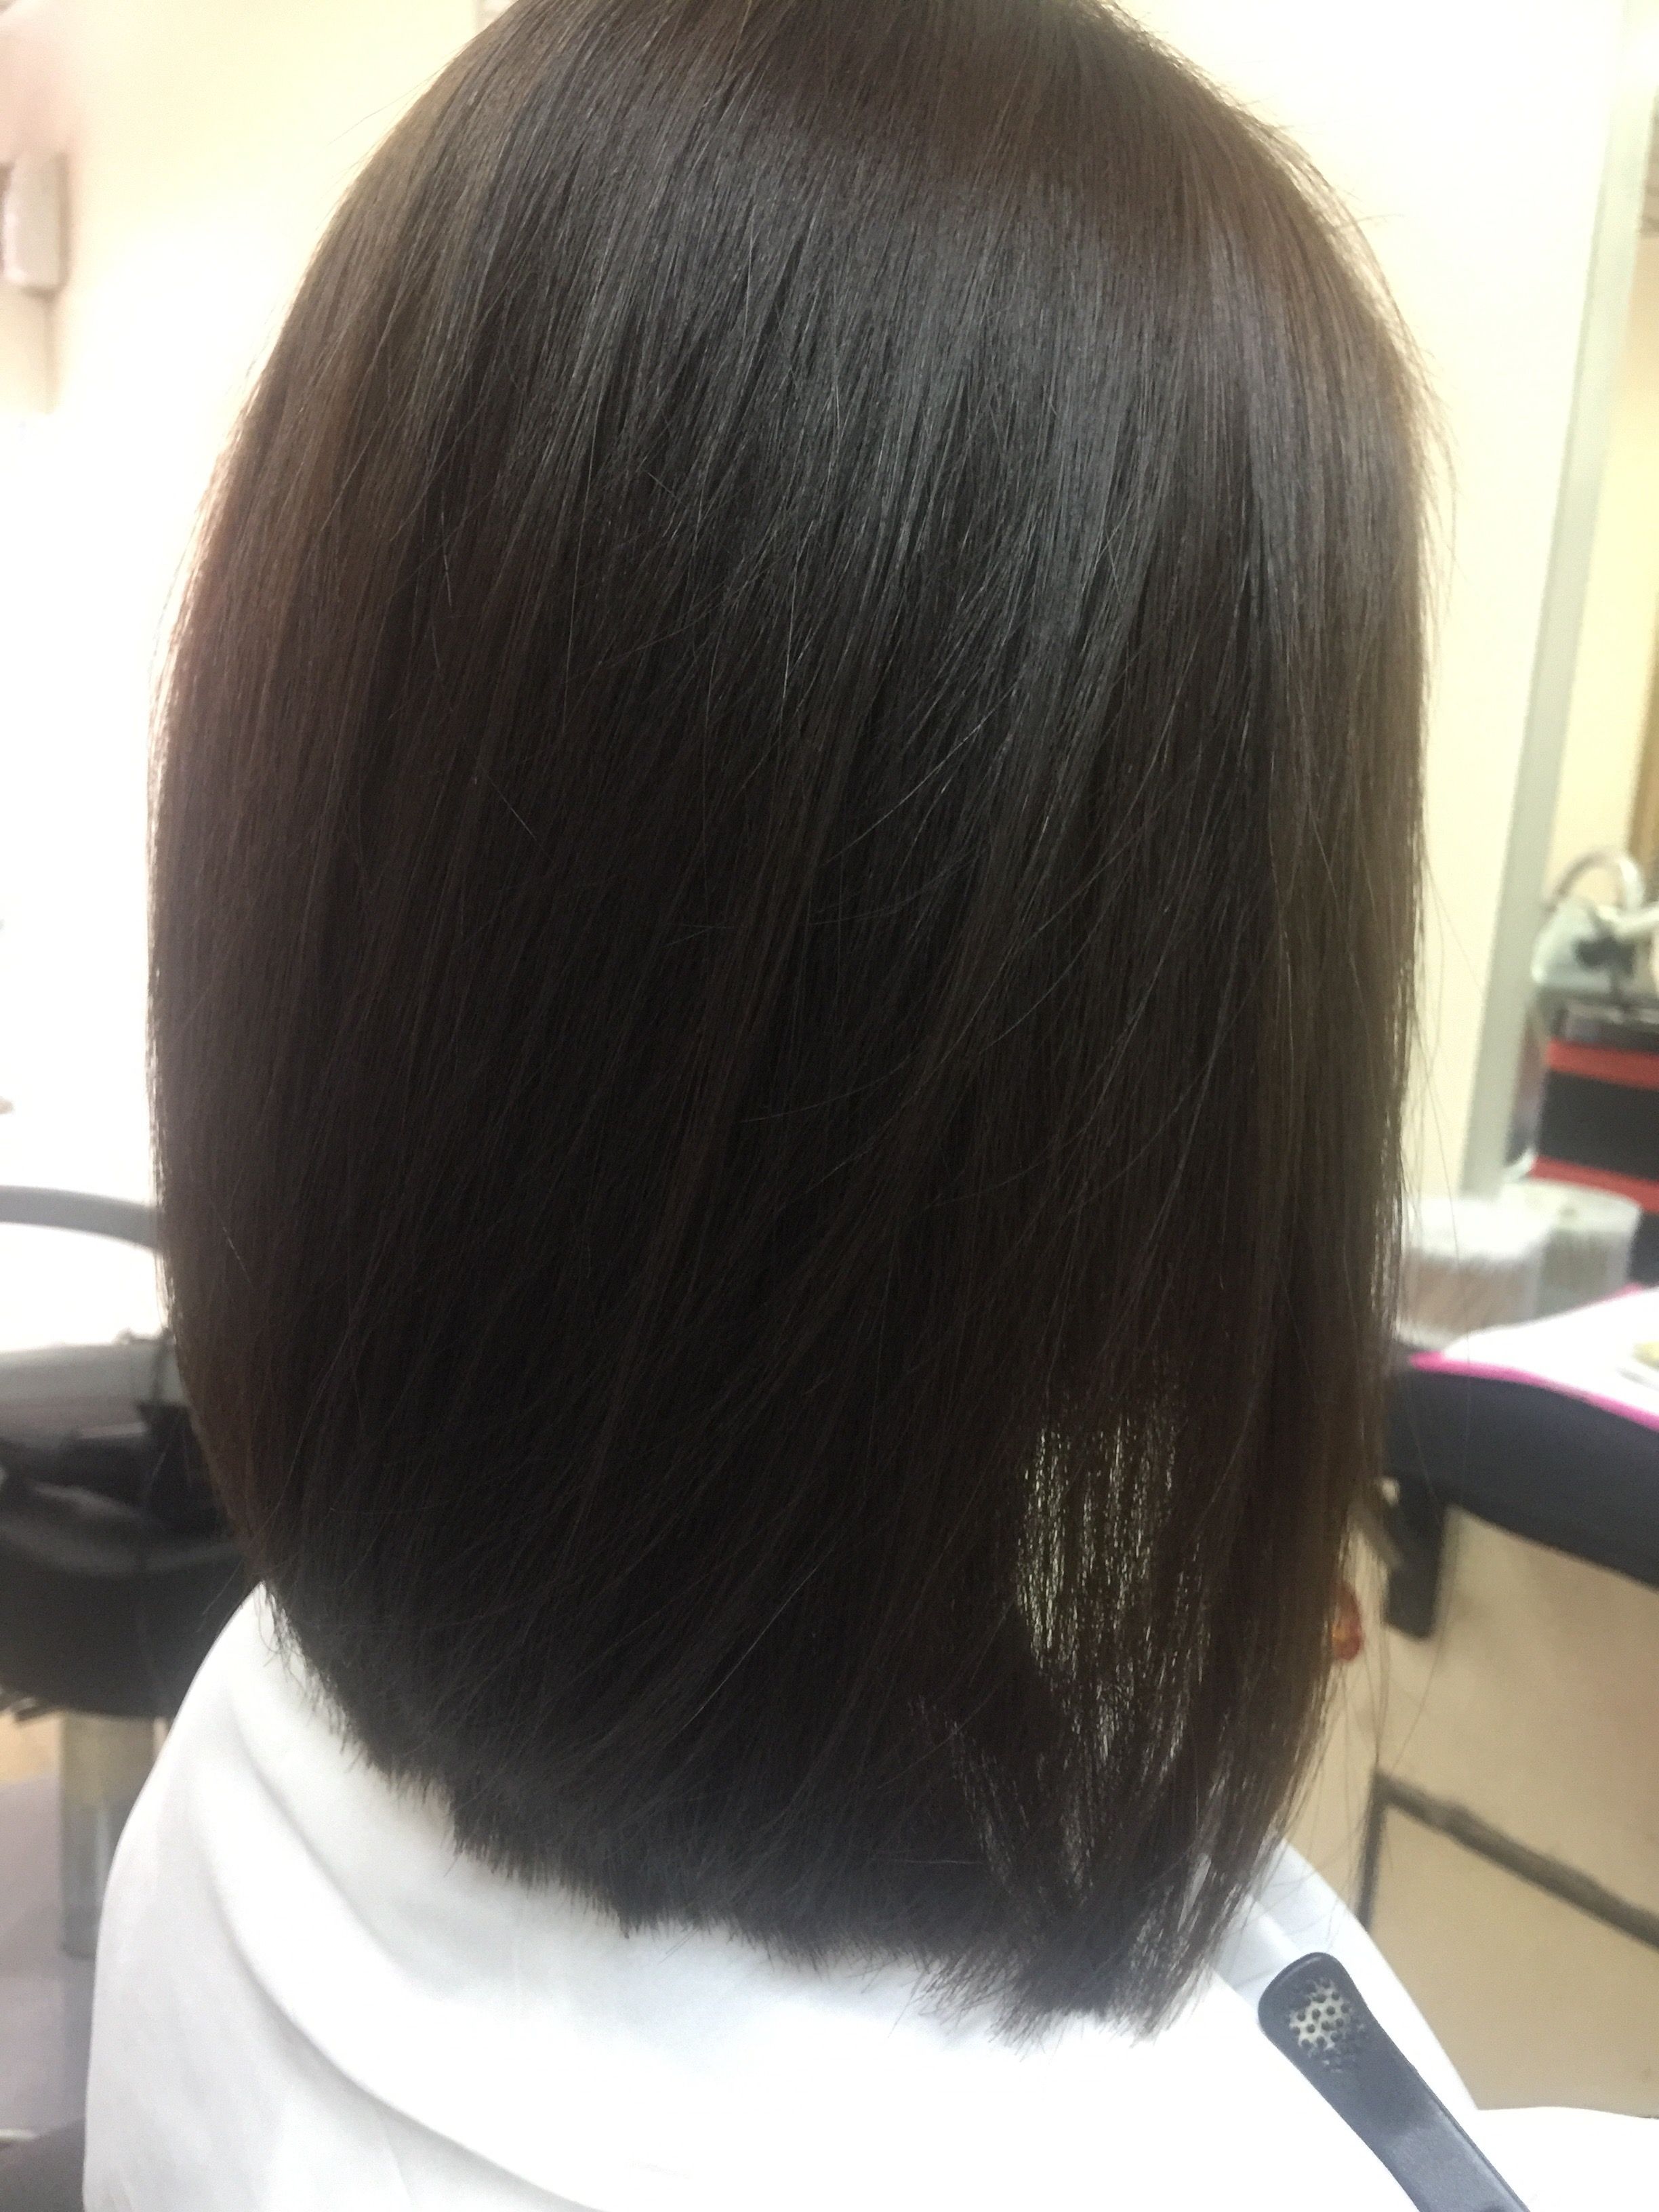 Hair Rebonding – Everything Happens For A Reason With Regard To Rebonded Short Hairstyles (View 14 of 25)